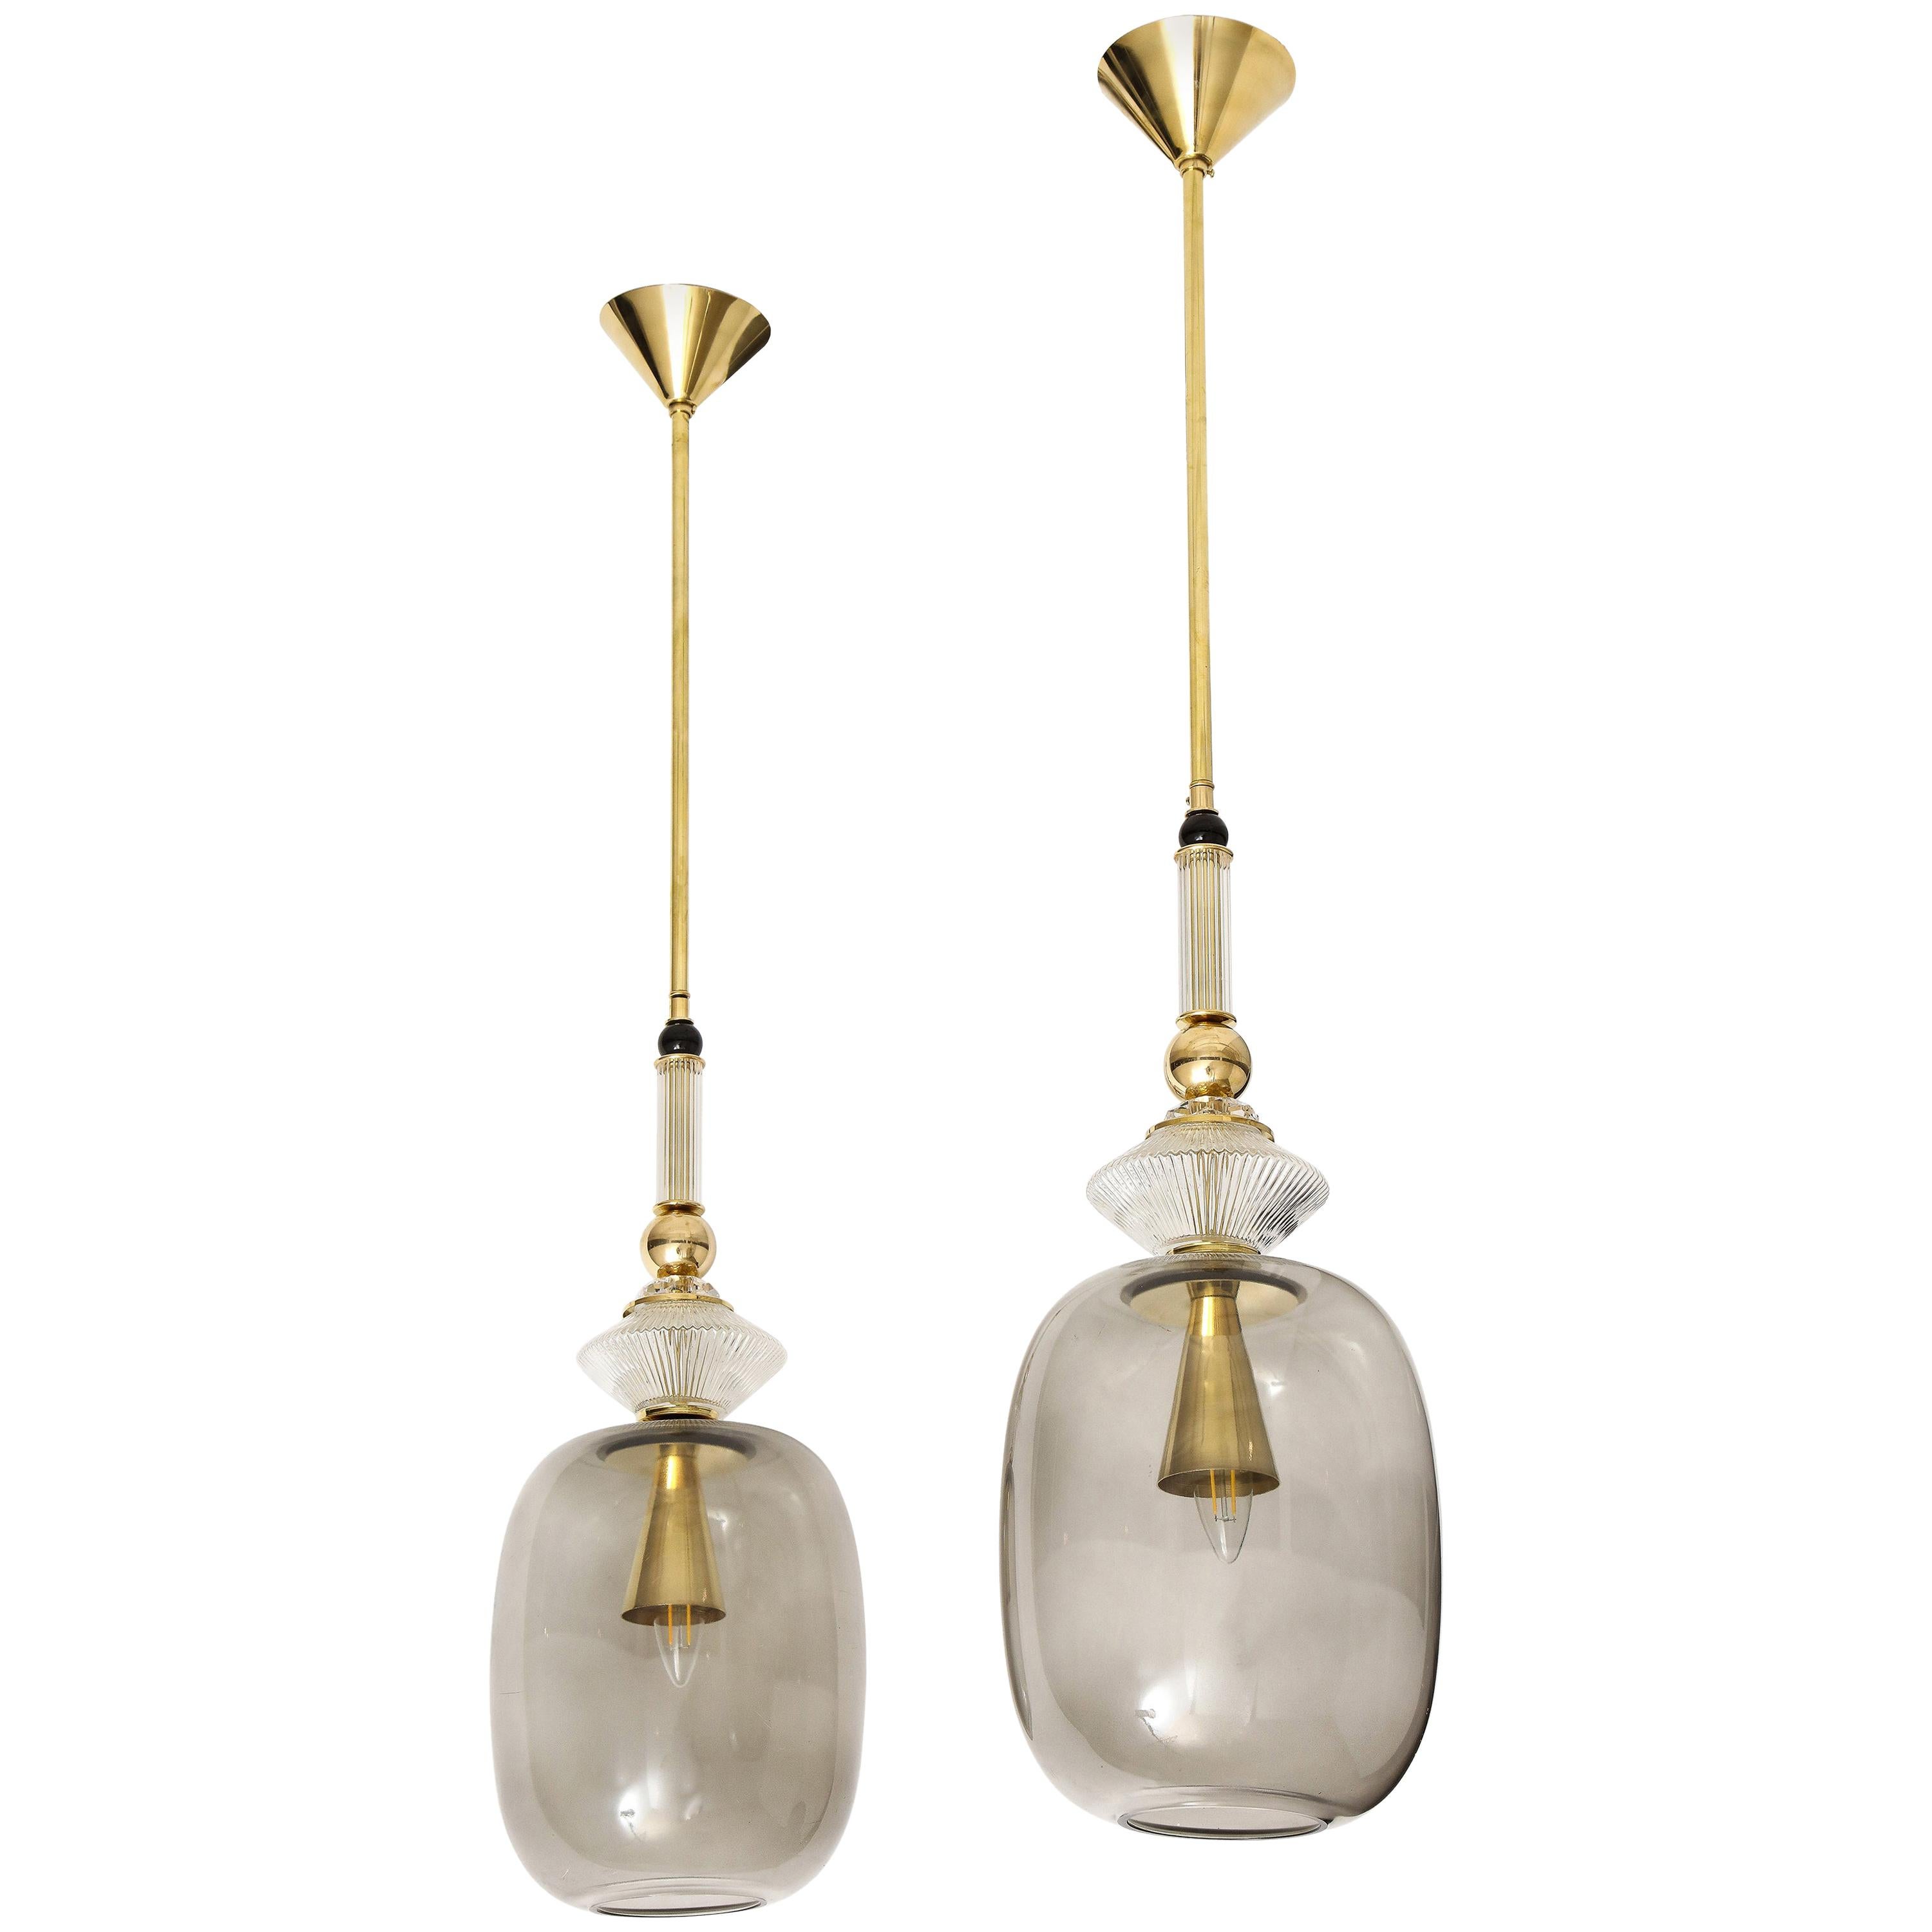 Pair of Smoked Grey Taupe Murano Glass and Brass Pendant Lights, Italy, 2020